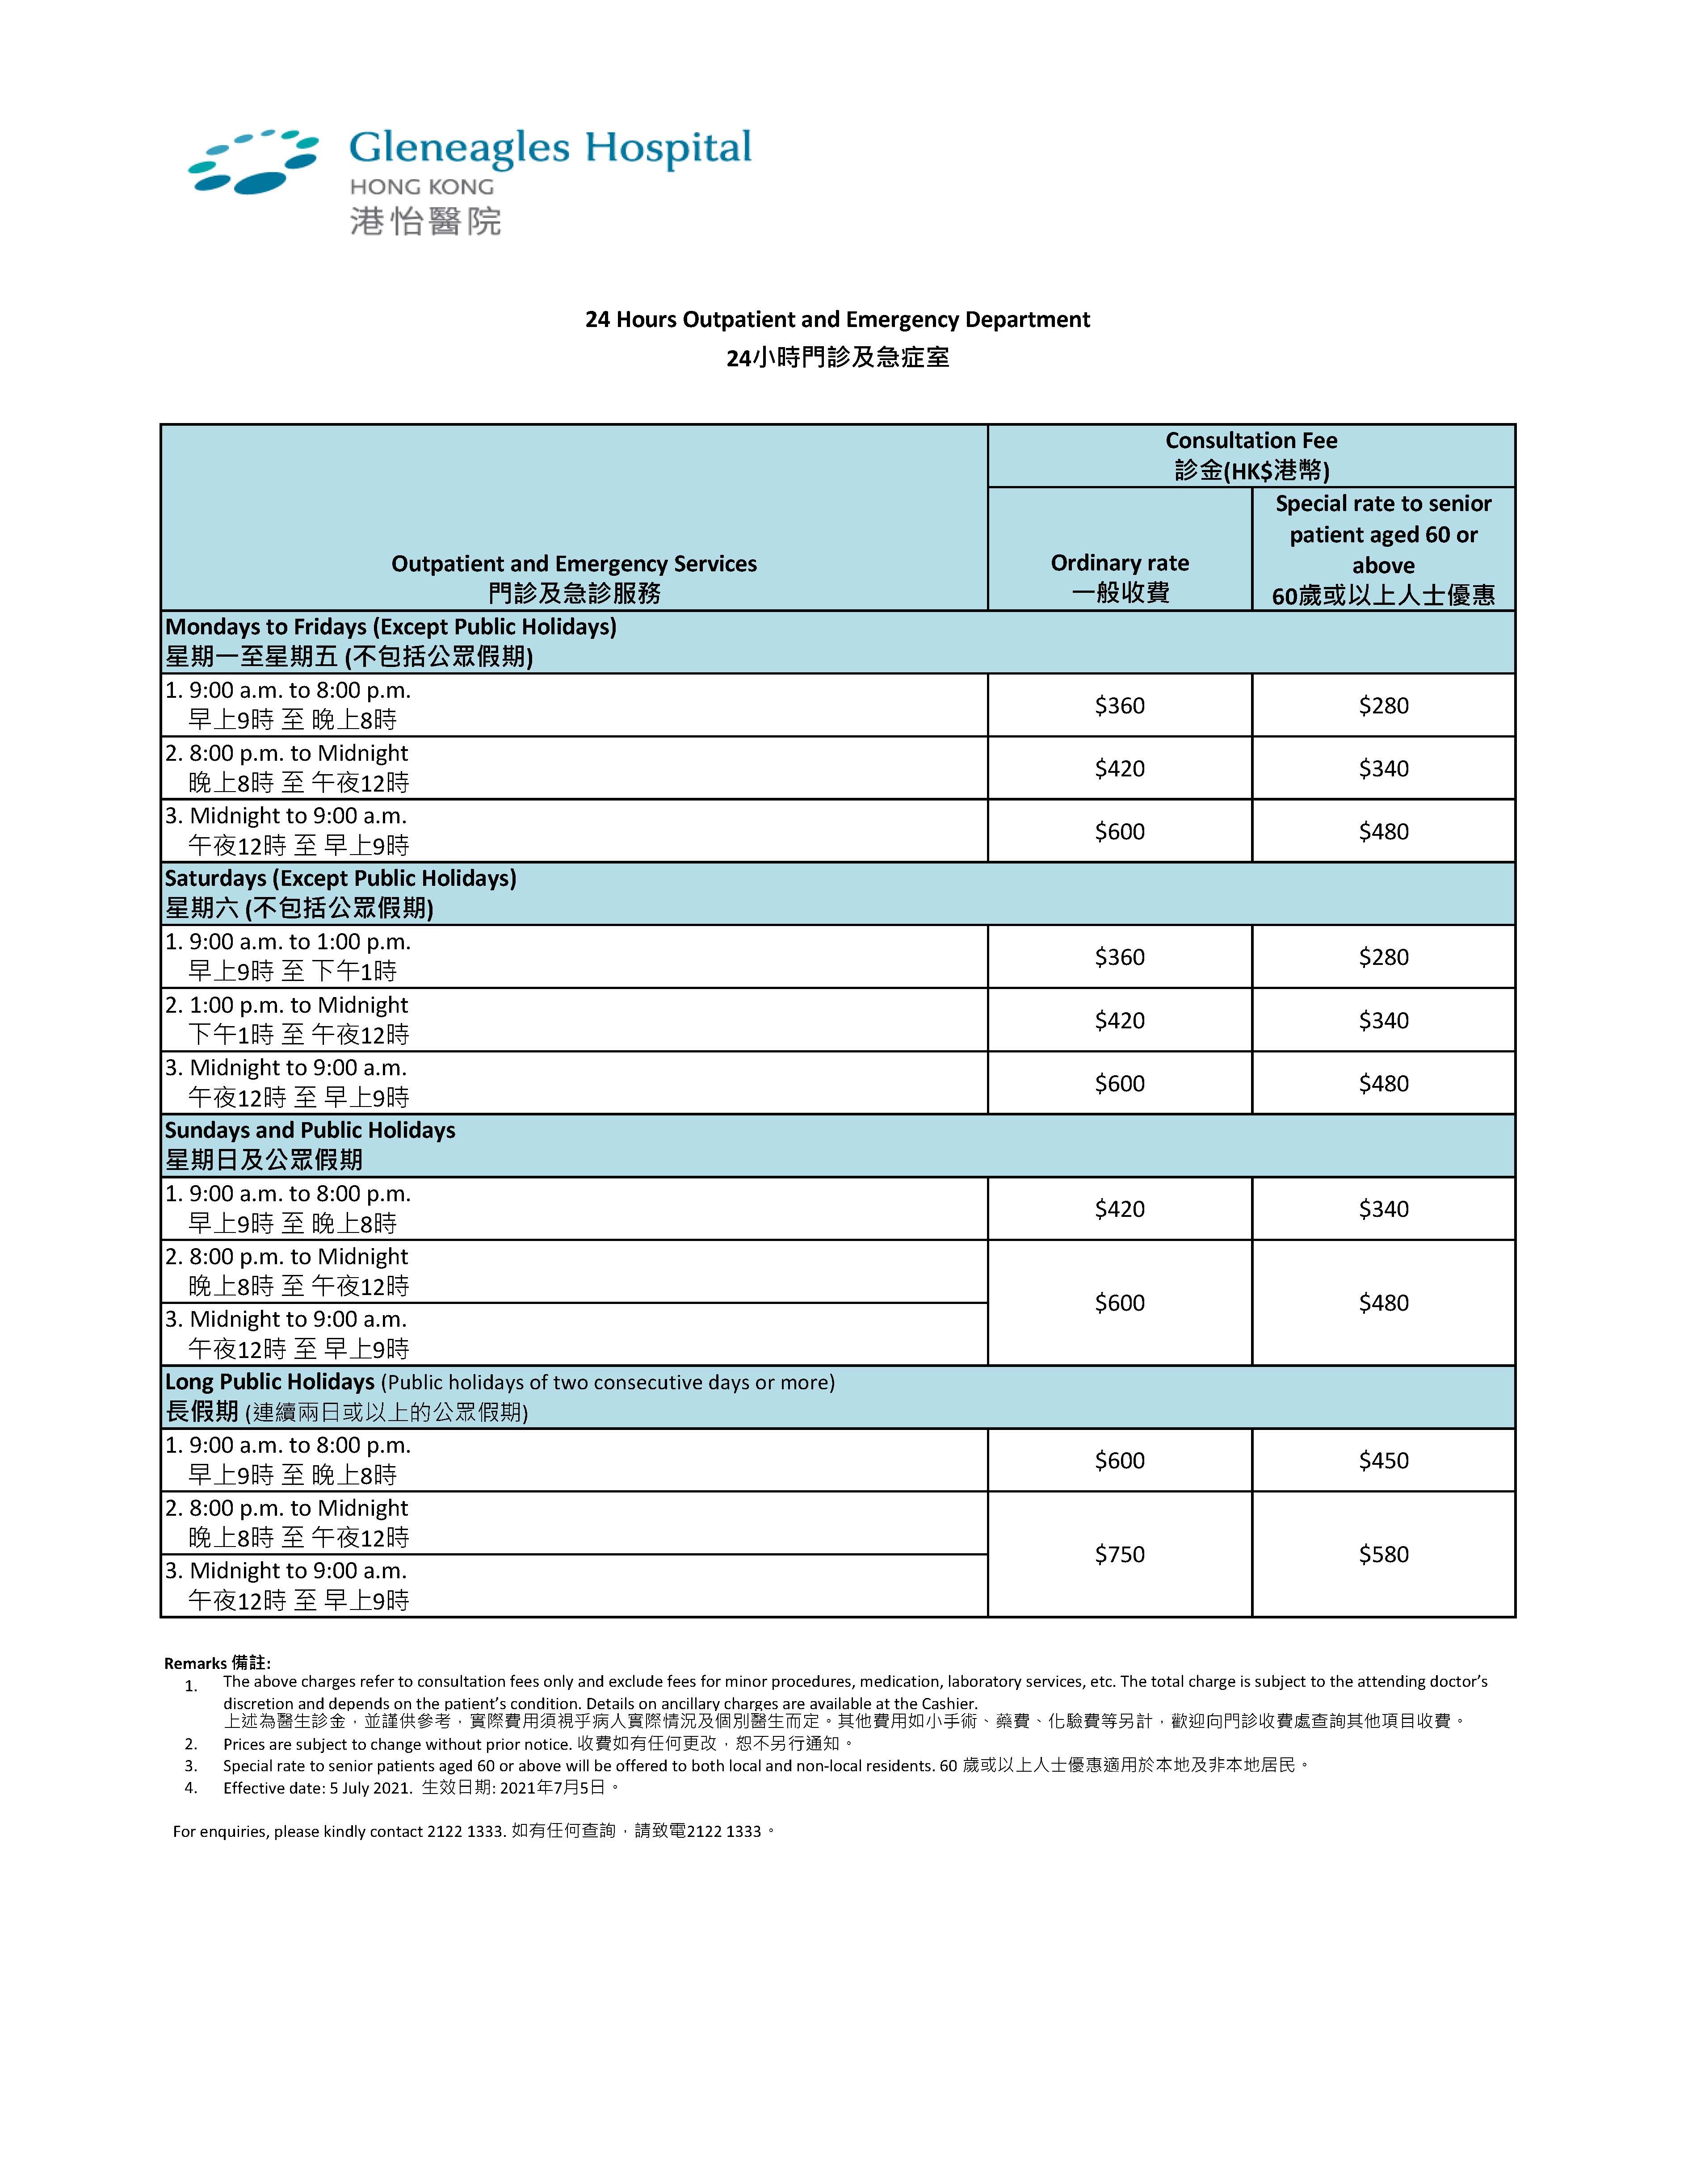 GHK Fees & Charges